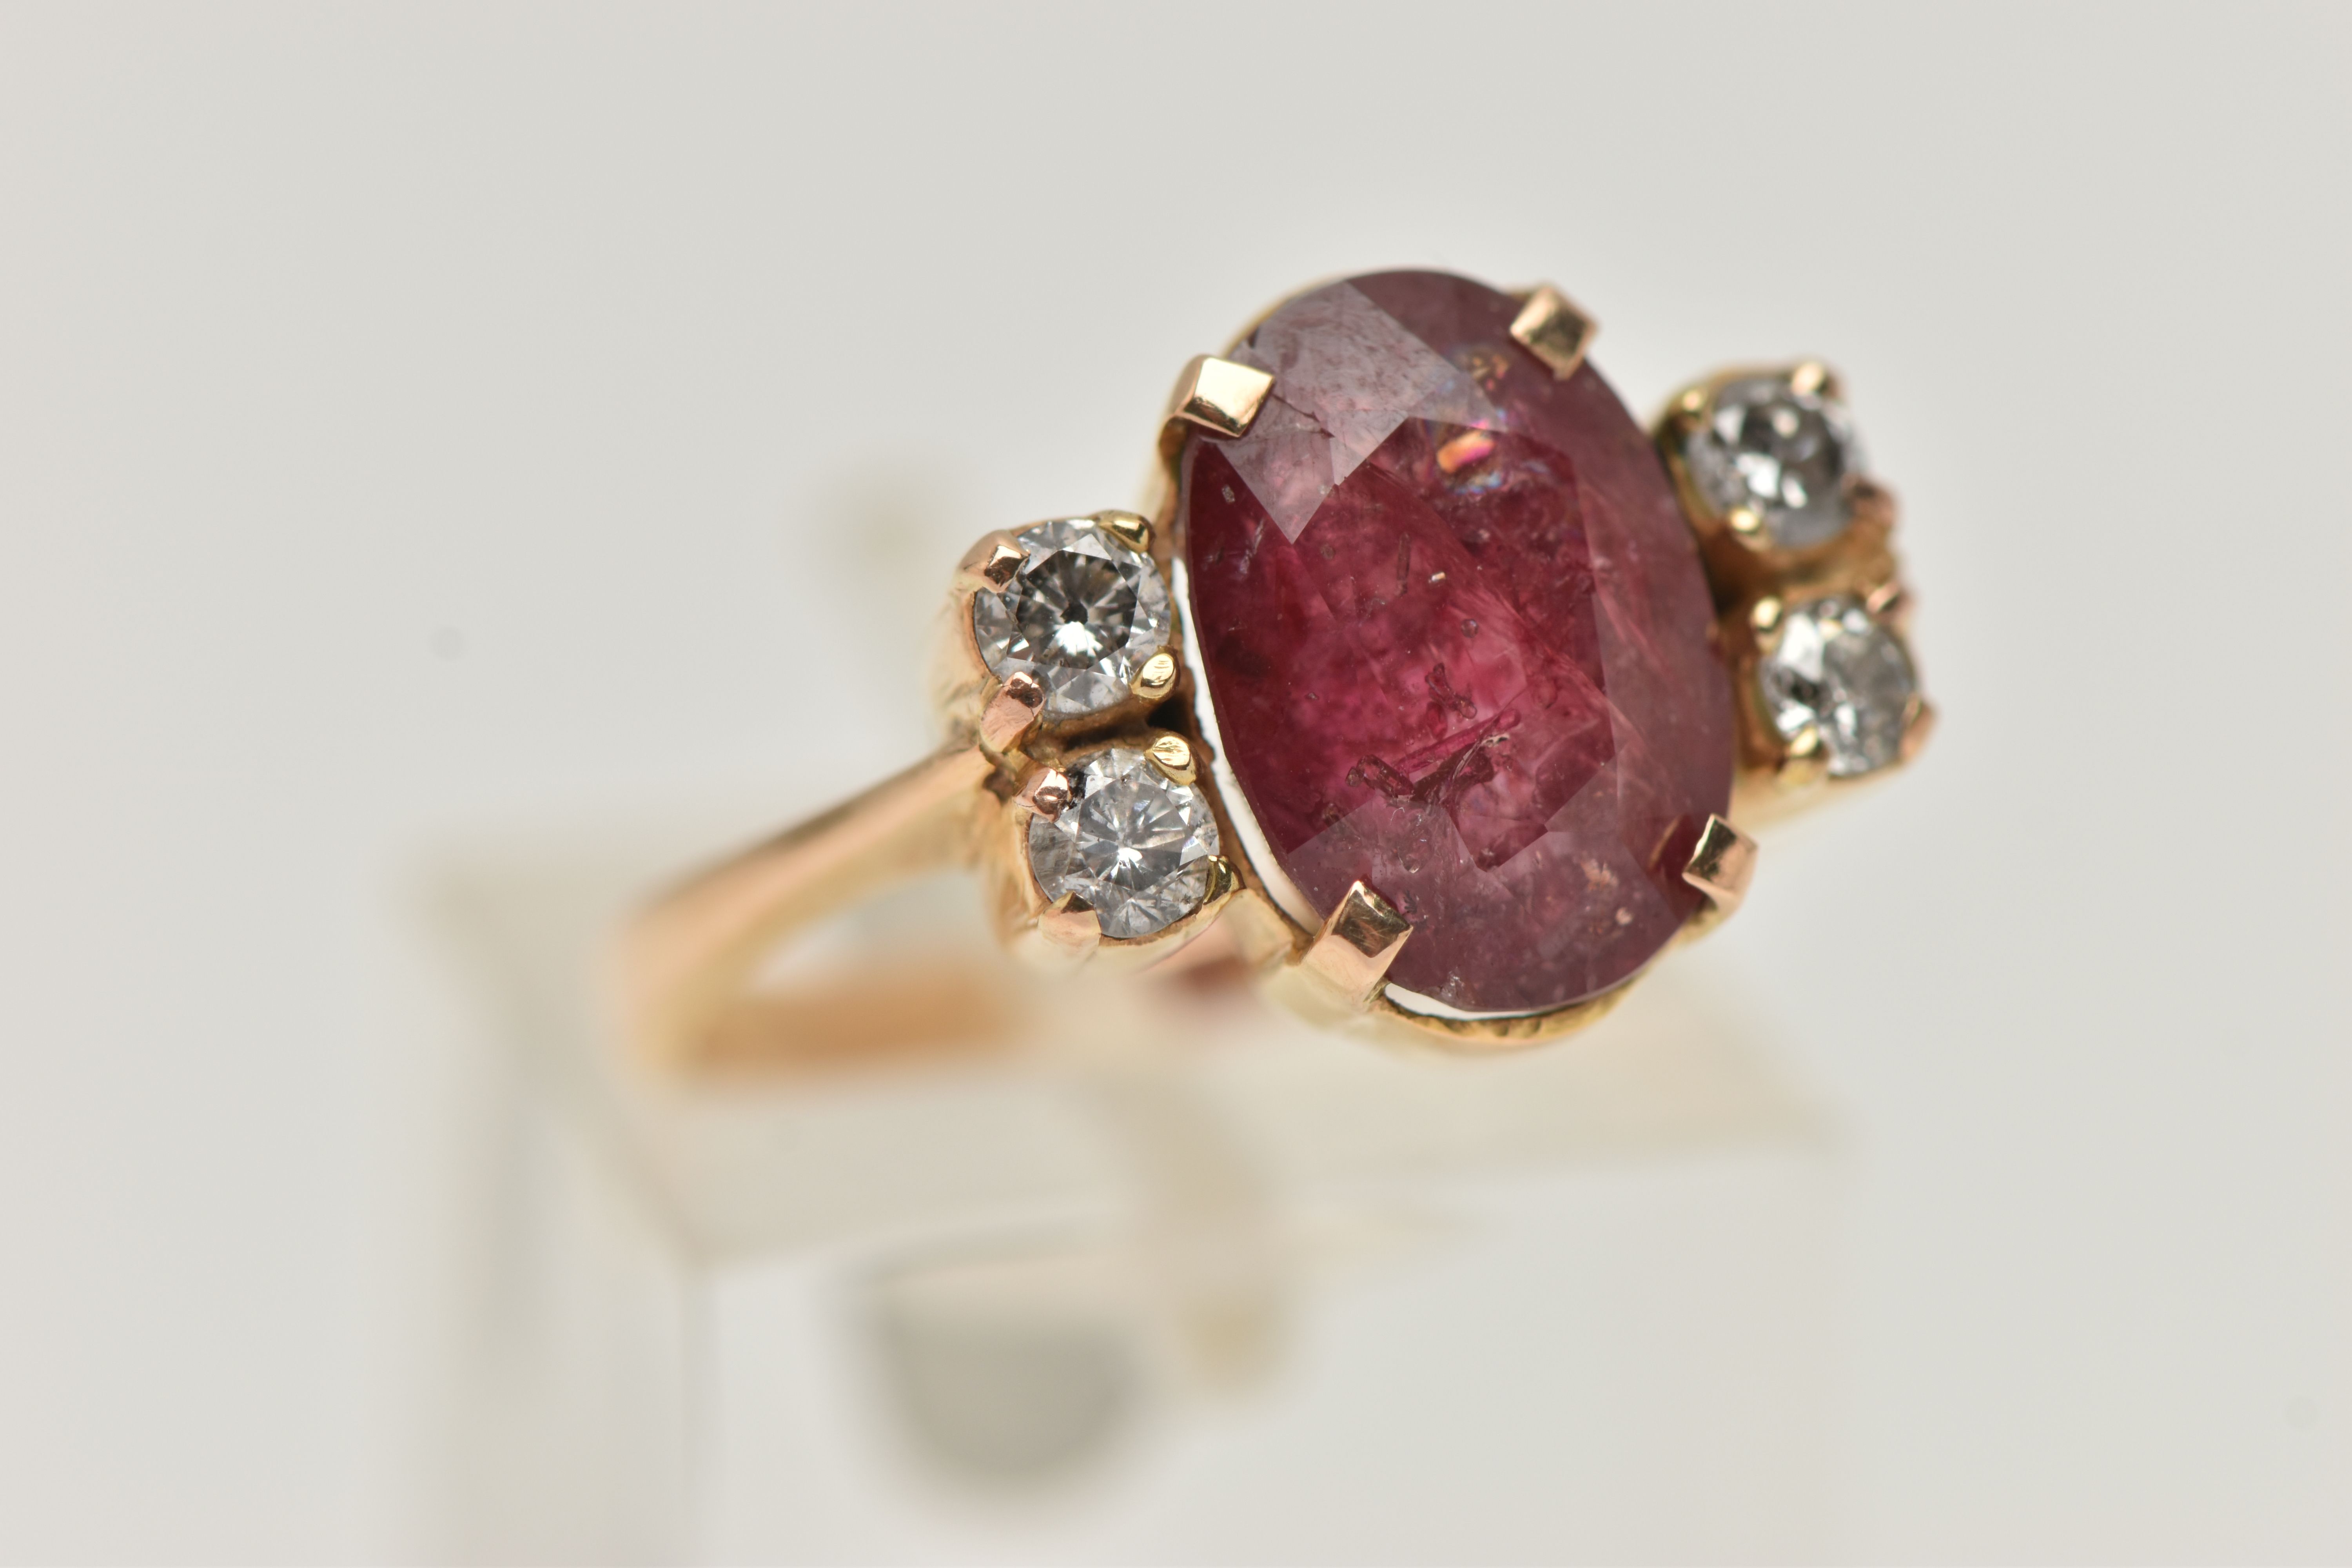 A YELLOW METAL FIVE STONE RING, centering on an oval cut heavily fracture filled red corundum, in - Image 4 of 4